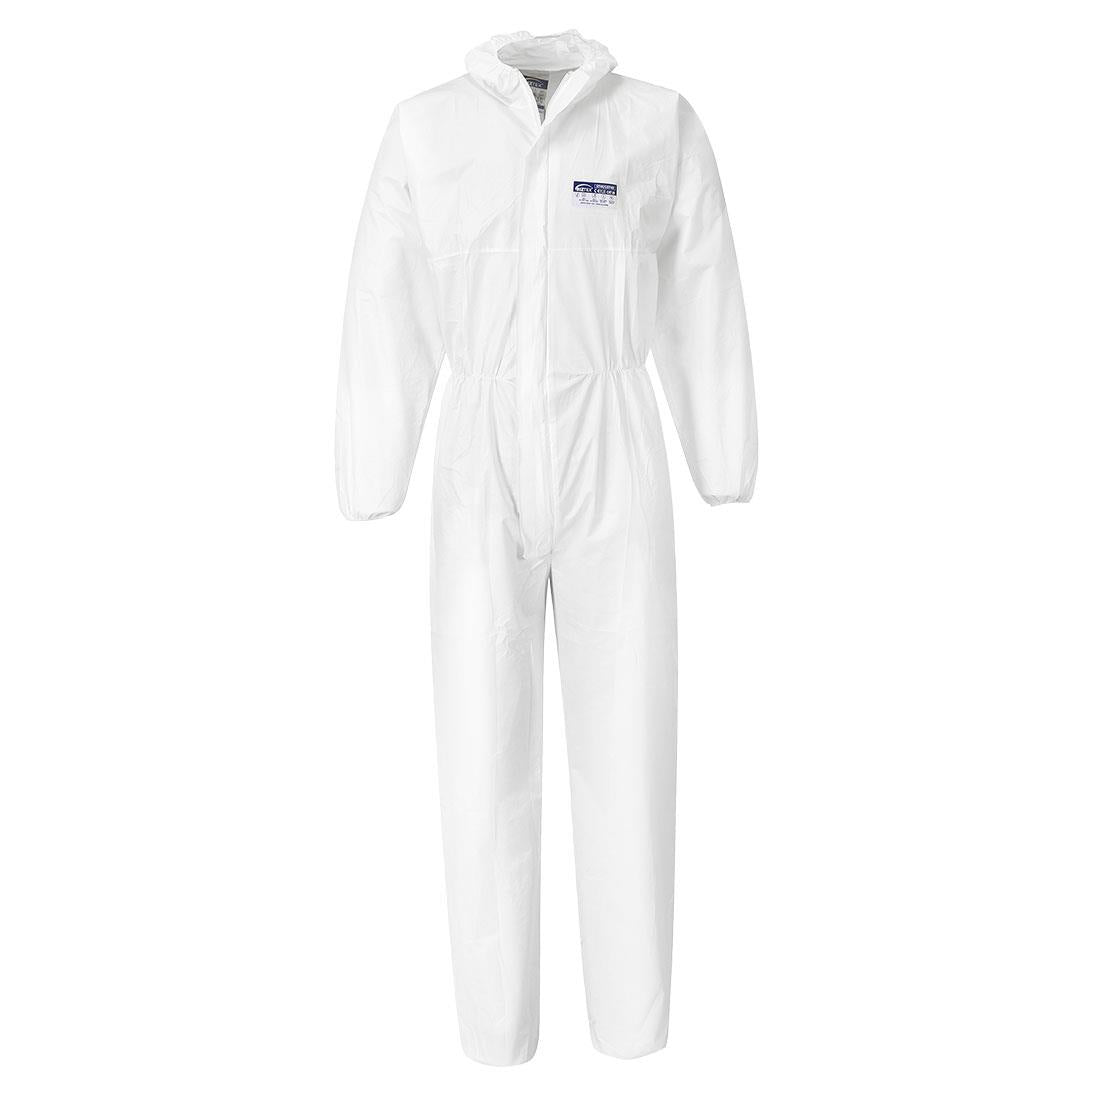 Portwest Type 5/6  anti-static mist/dust proof white disposable coverall #ST40